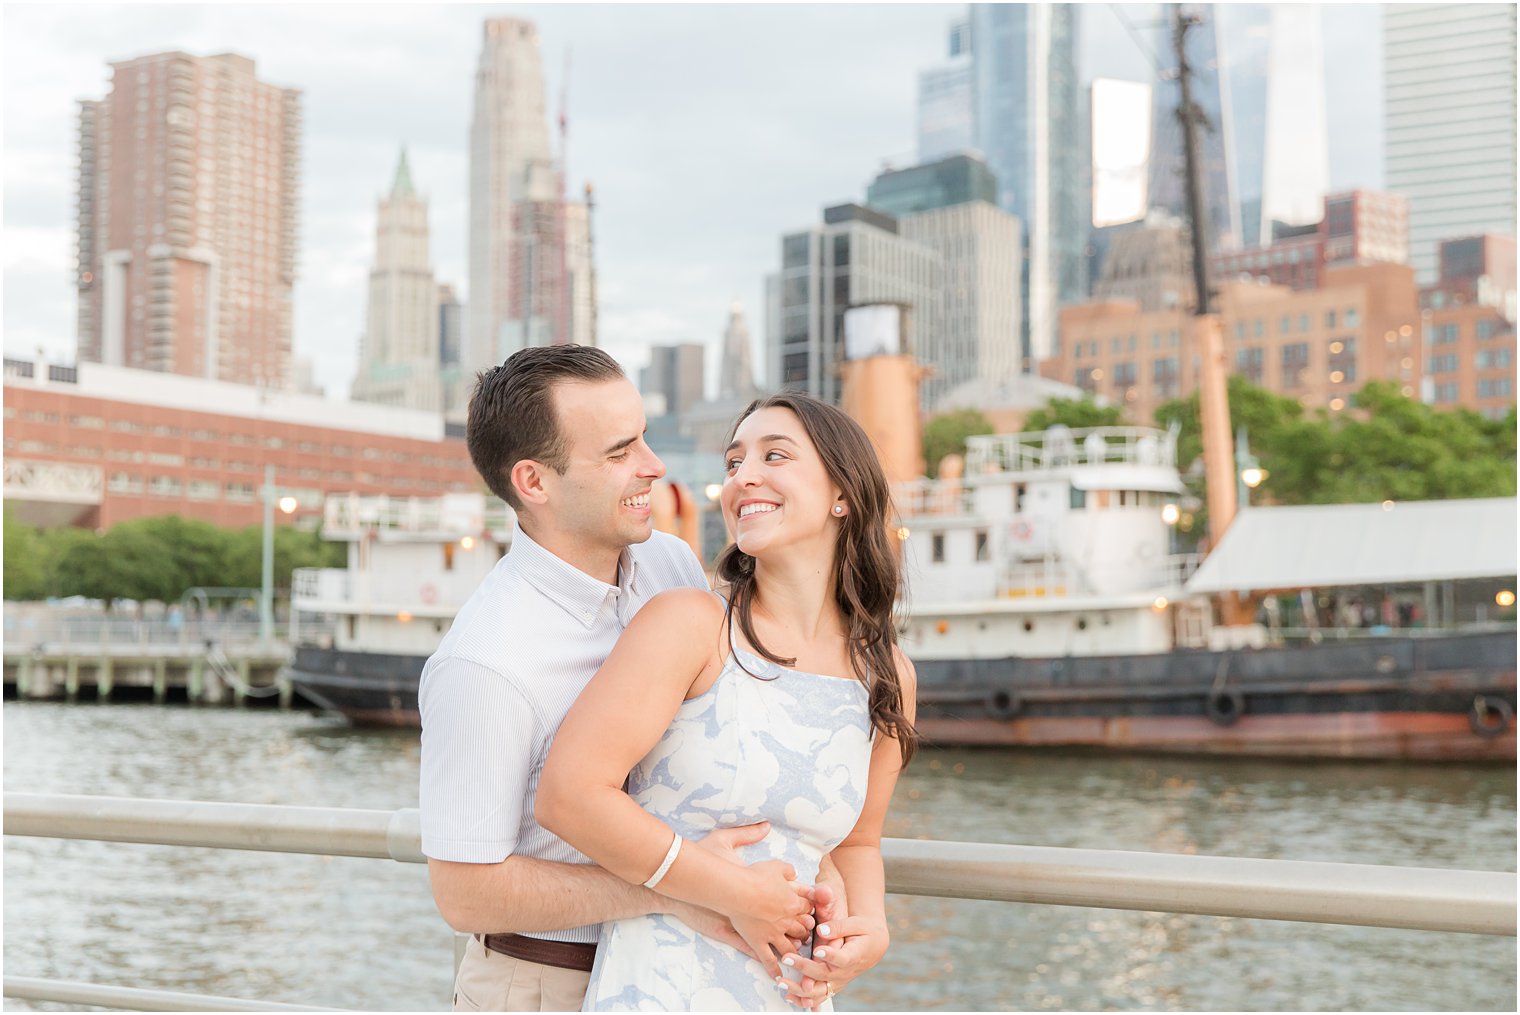 Pier 26 engagement session in Tribeca